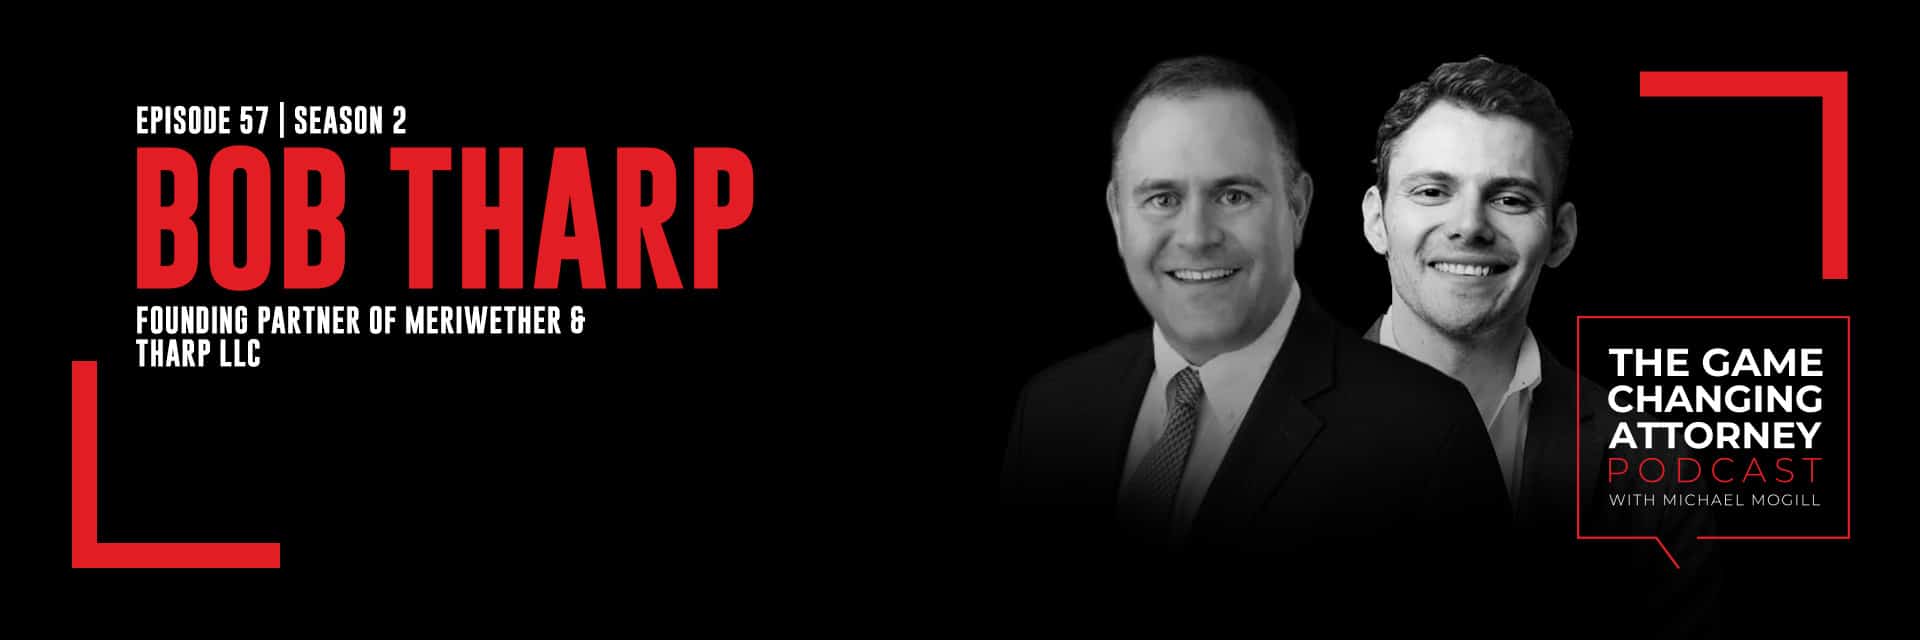 Bob Tharp - The Game Changing Attorney Podcast - Desktop